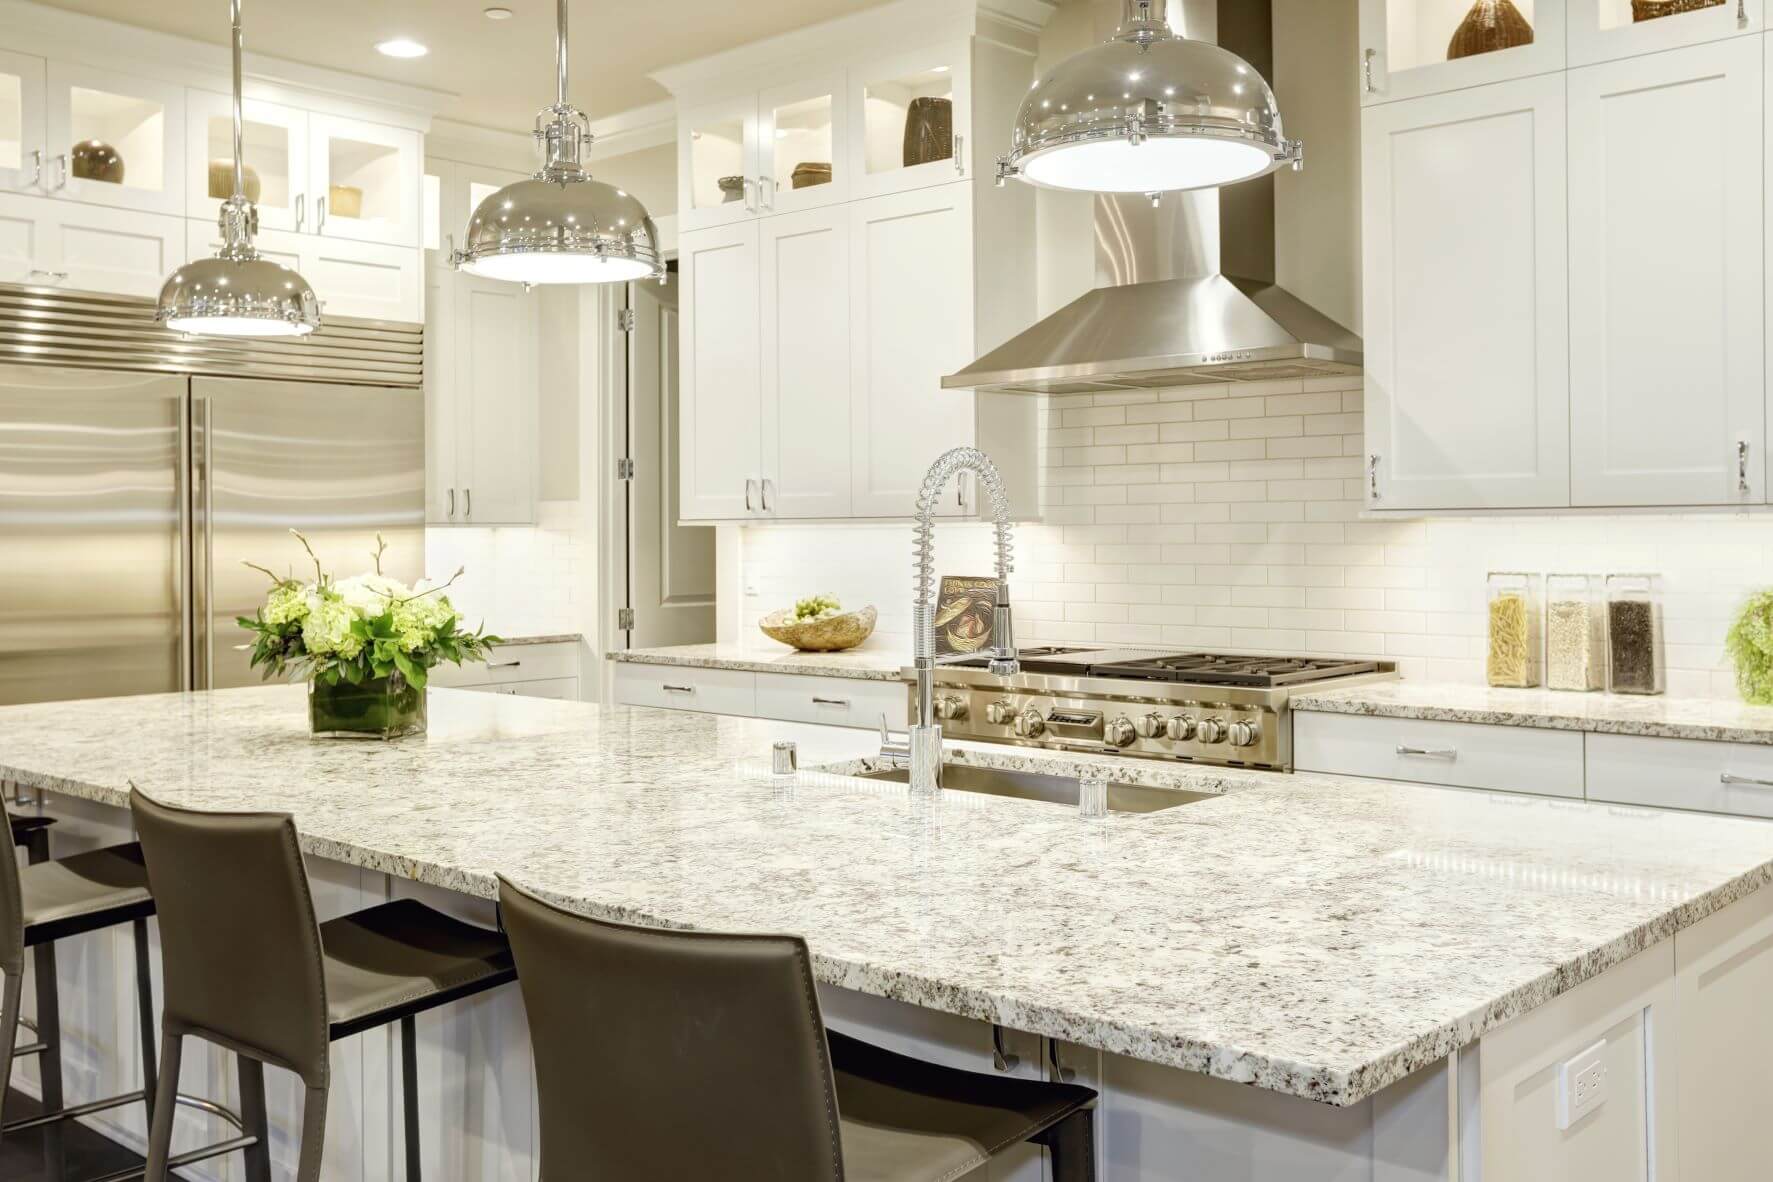 countertop island and cabinets